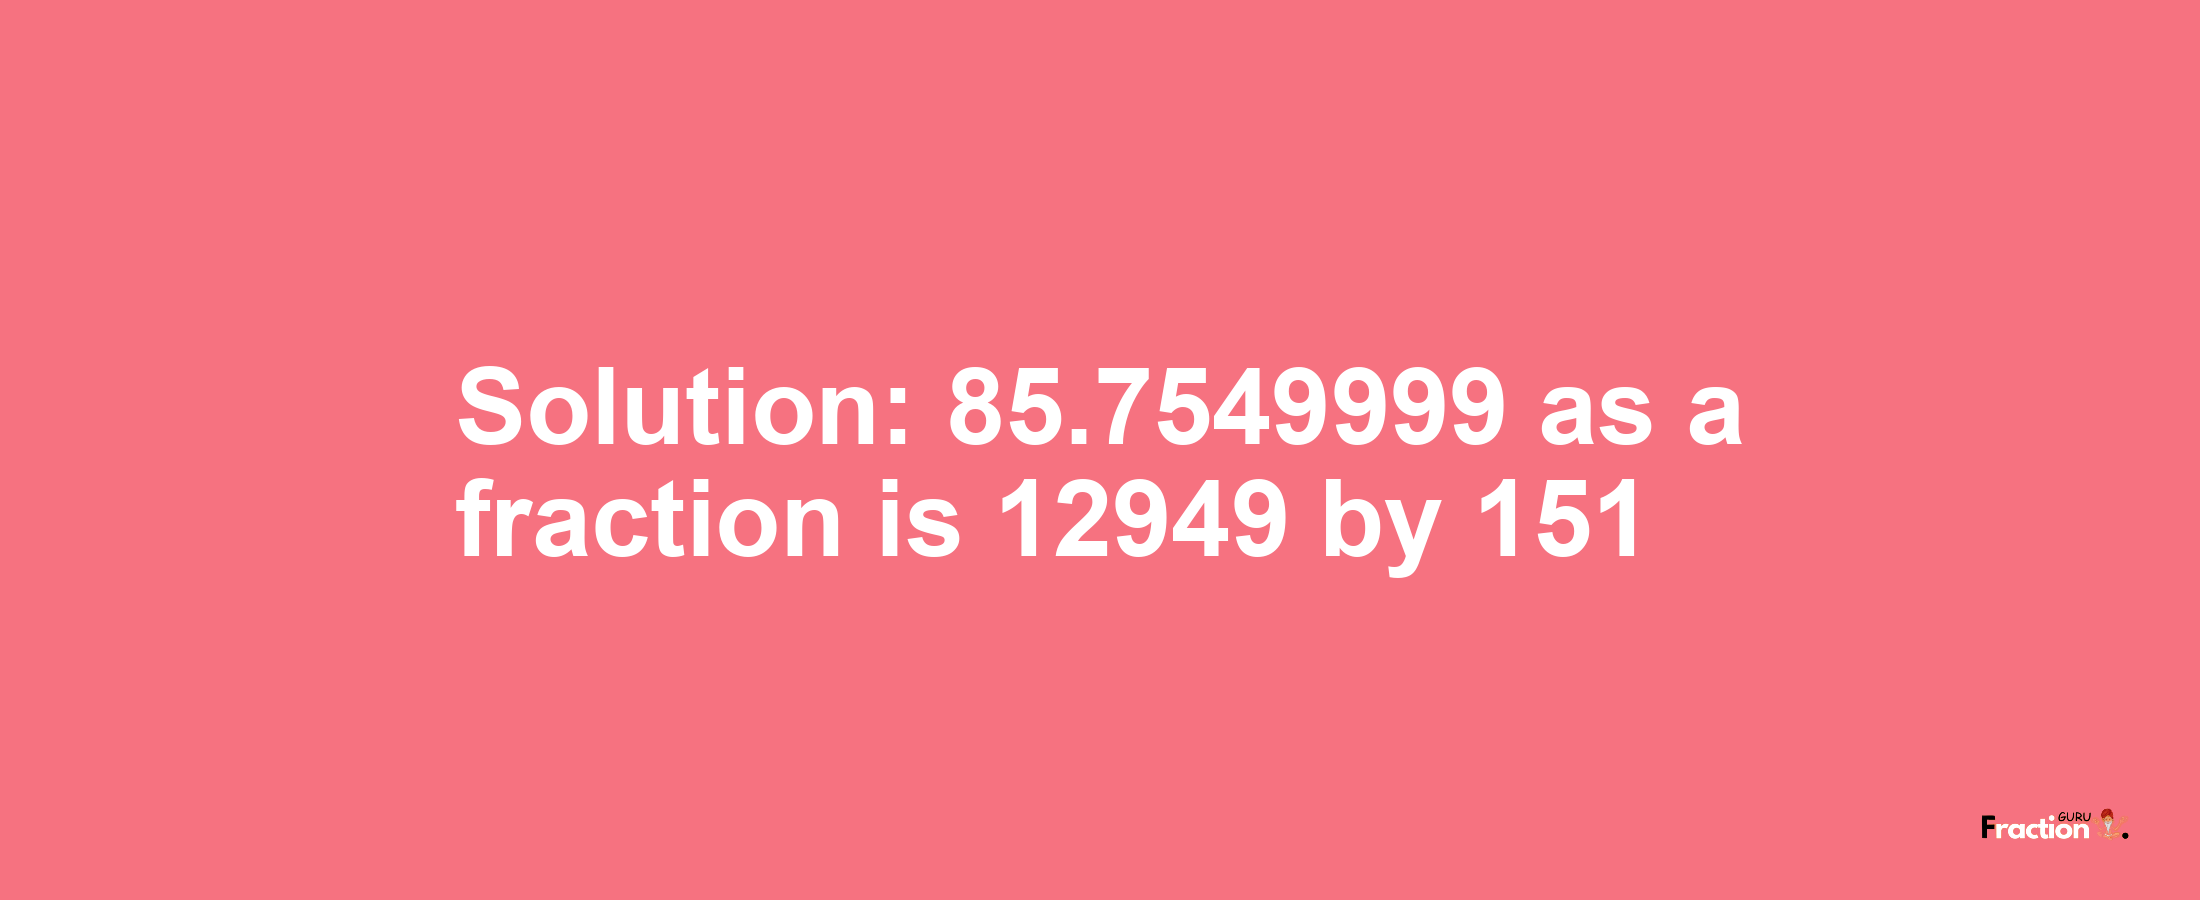 Solution:85.7549999 as a fraction is 12949/151